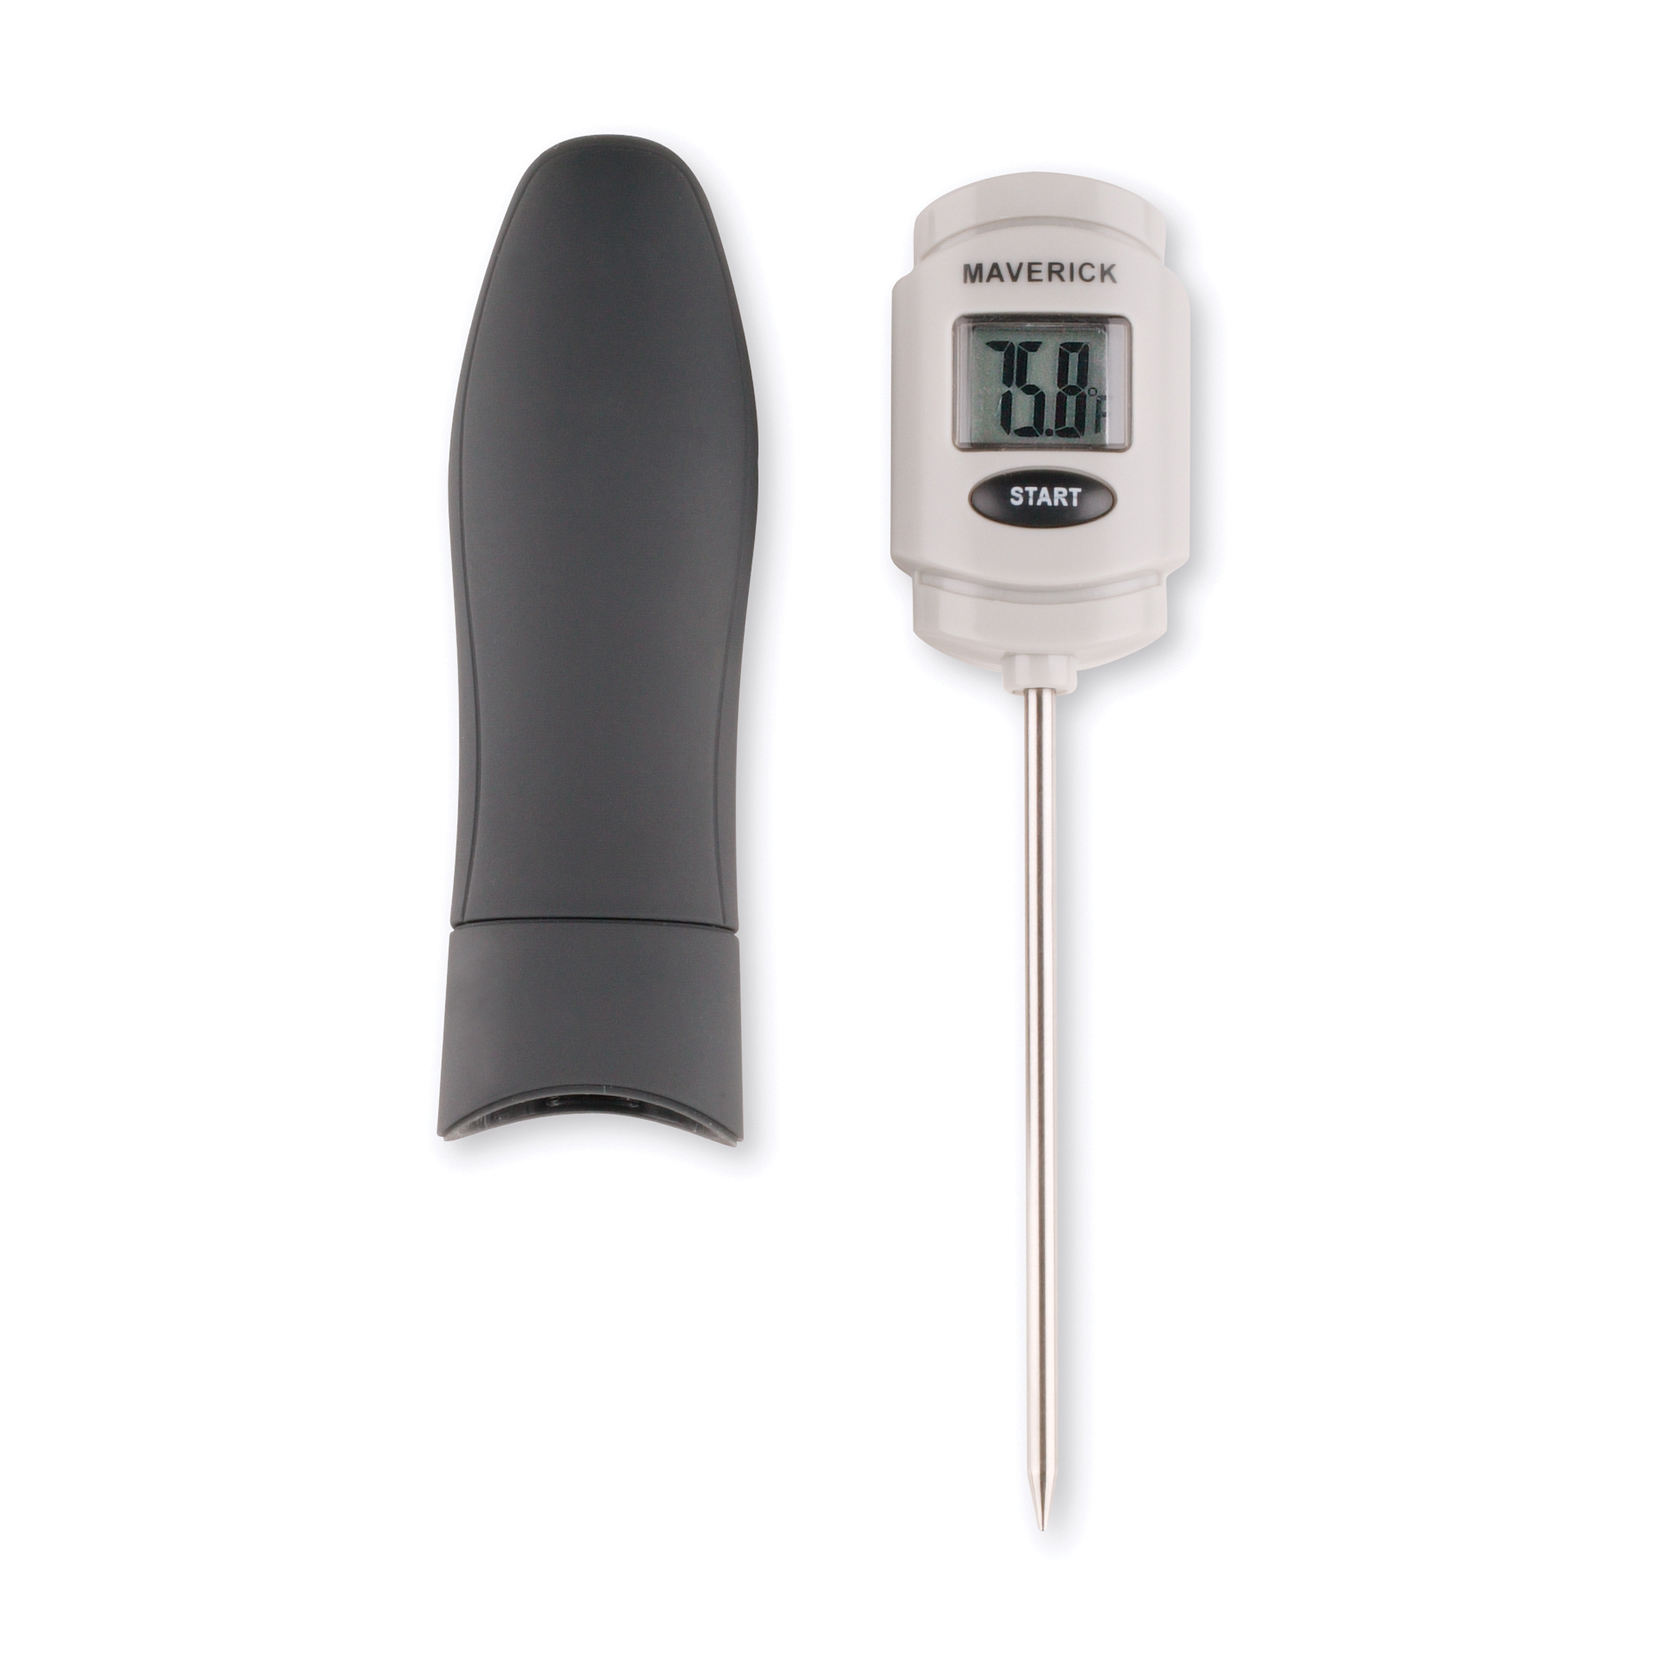 https://www.maverickthermometers.com/wp-content/uploads/2021/05/DT-12C_1_product.jpg